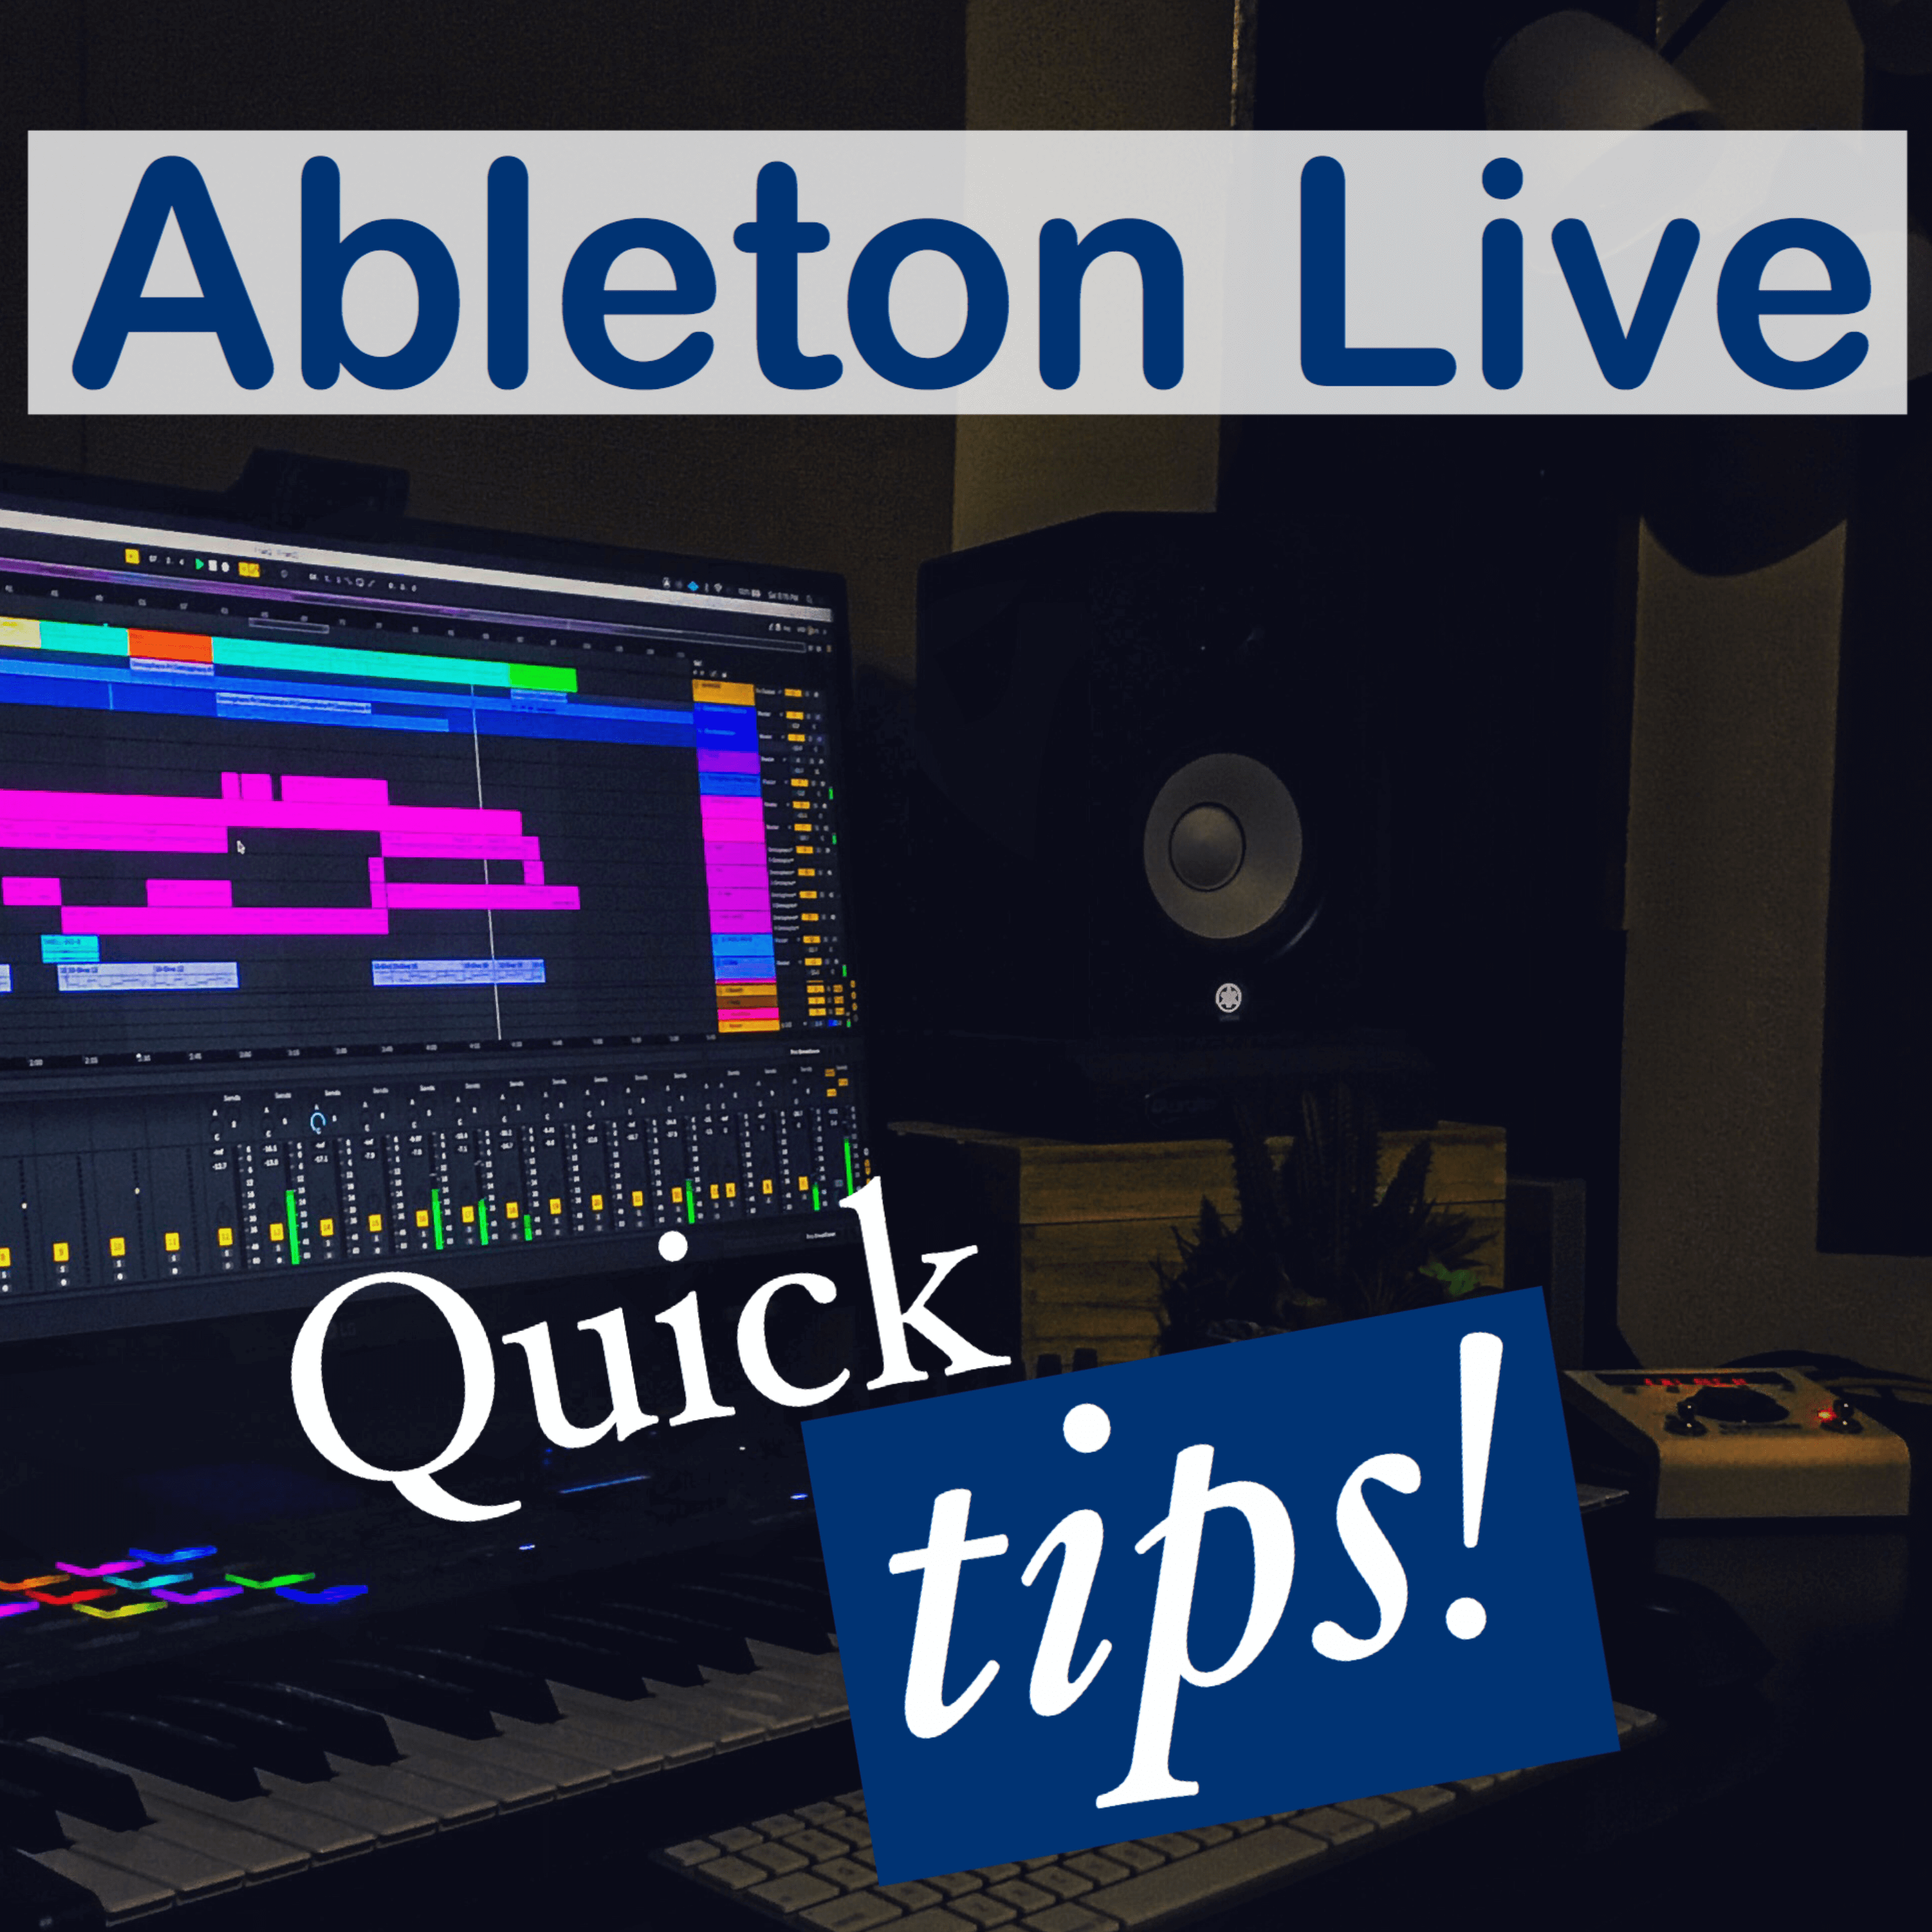 Ableton Live Quick Tips #4